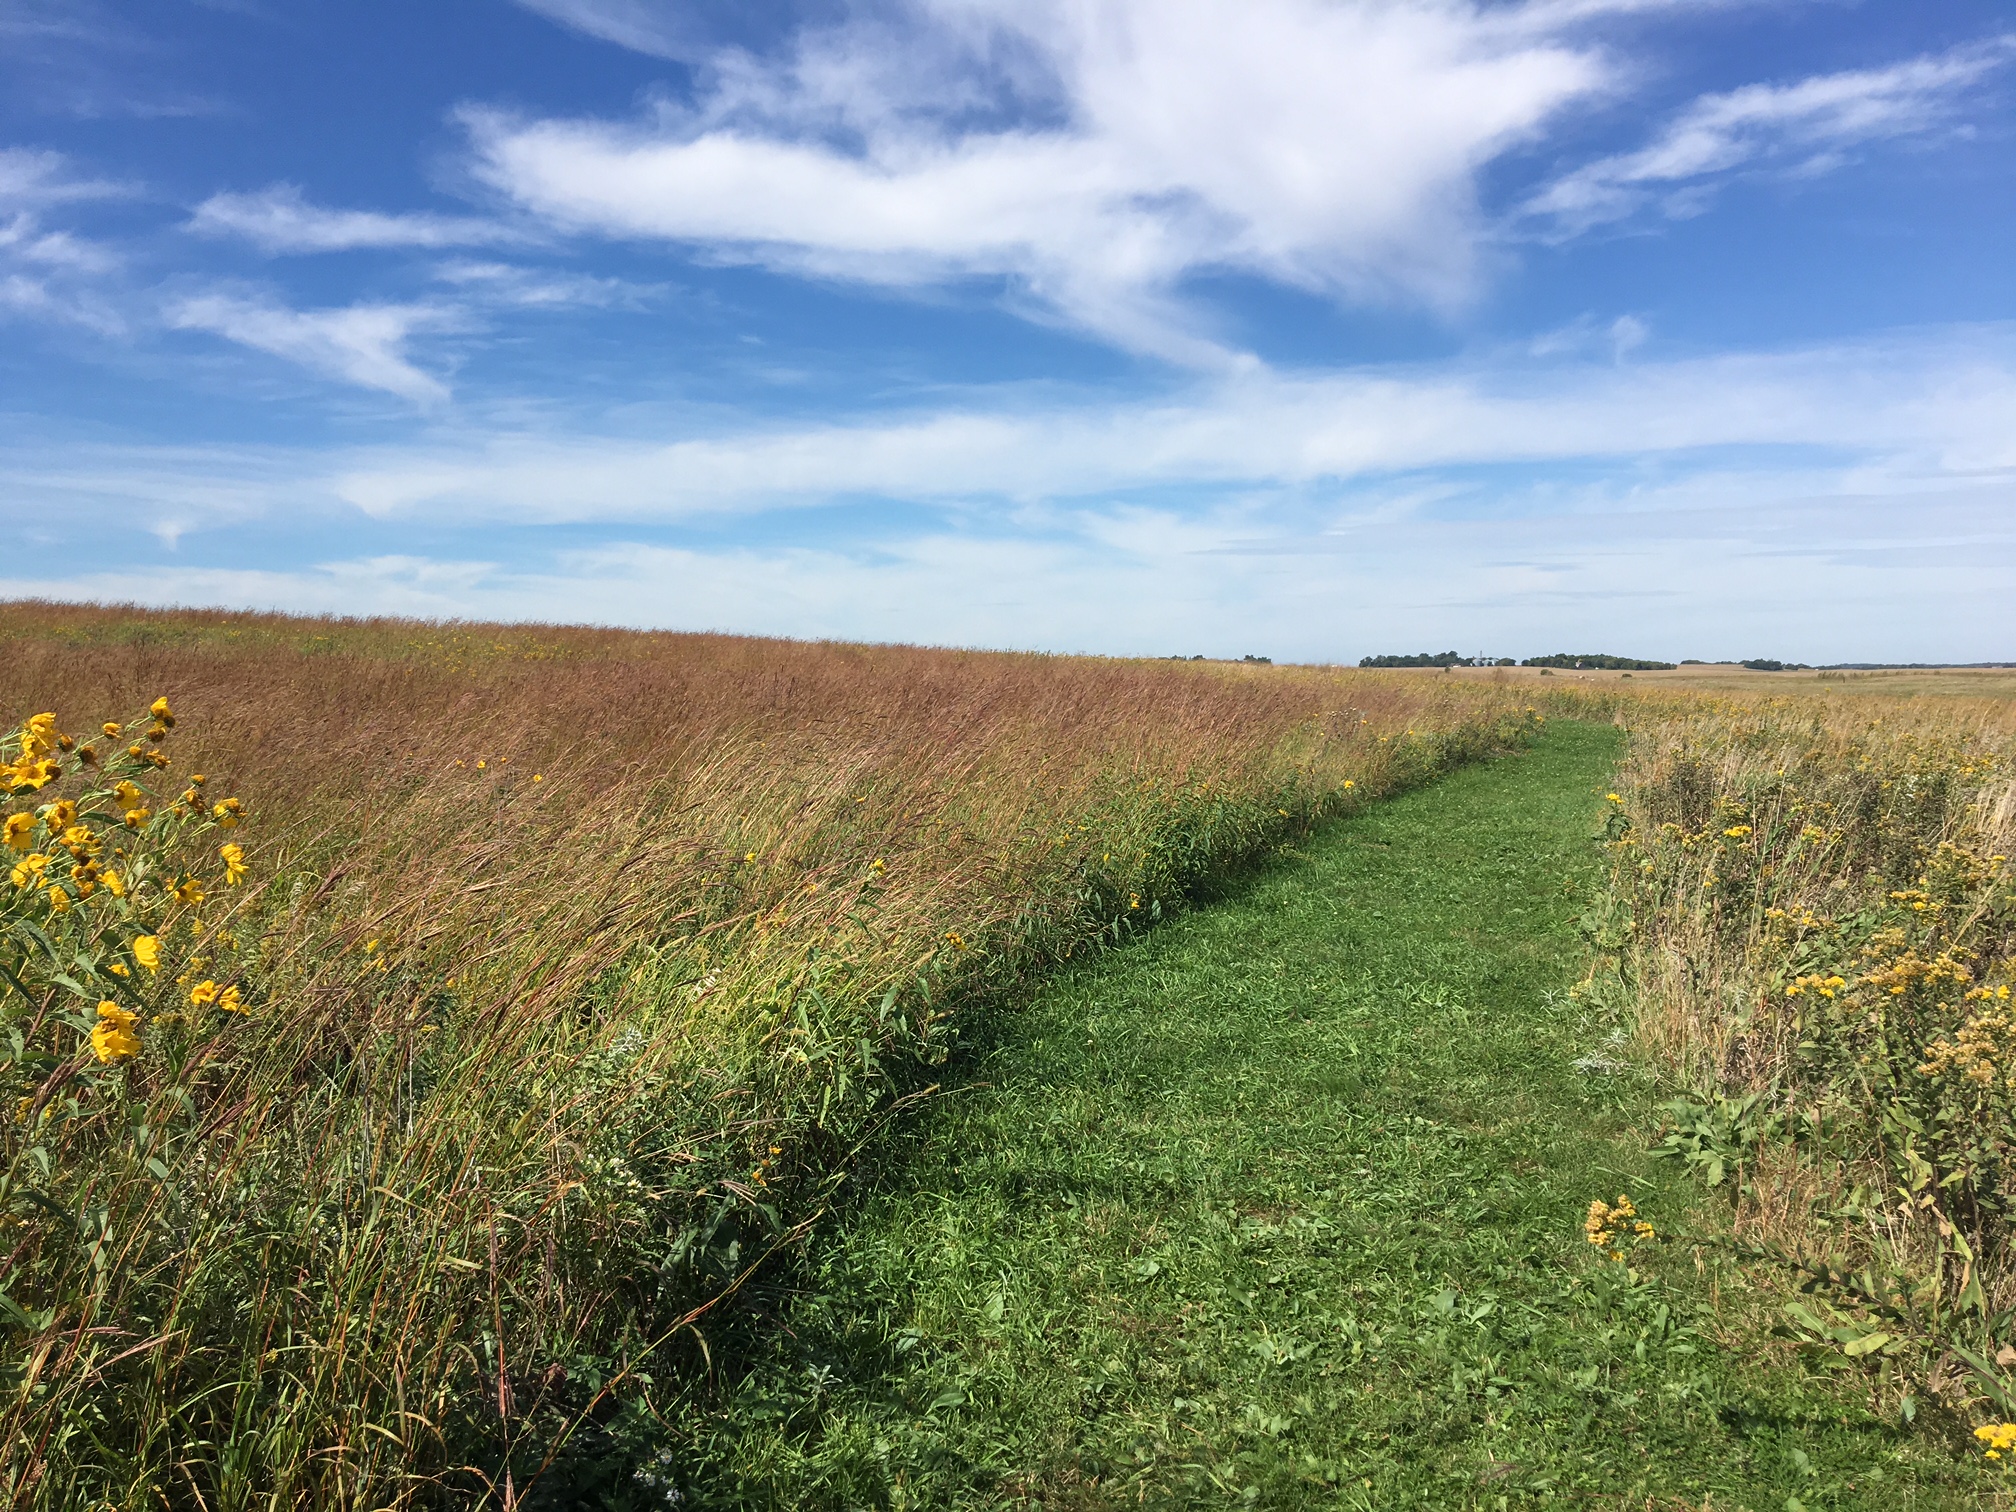 A mowed trail passes through a big bluestem prairie. There is a beautiful blue sky with fluffy white clouds.